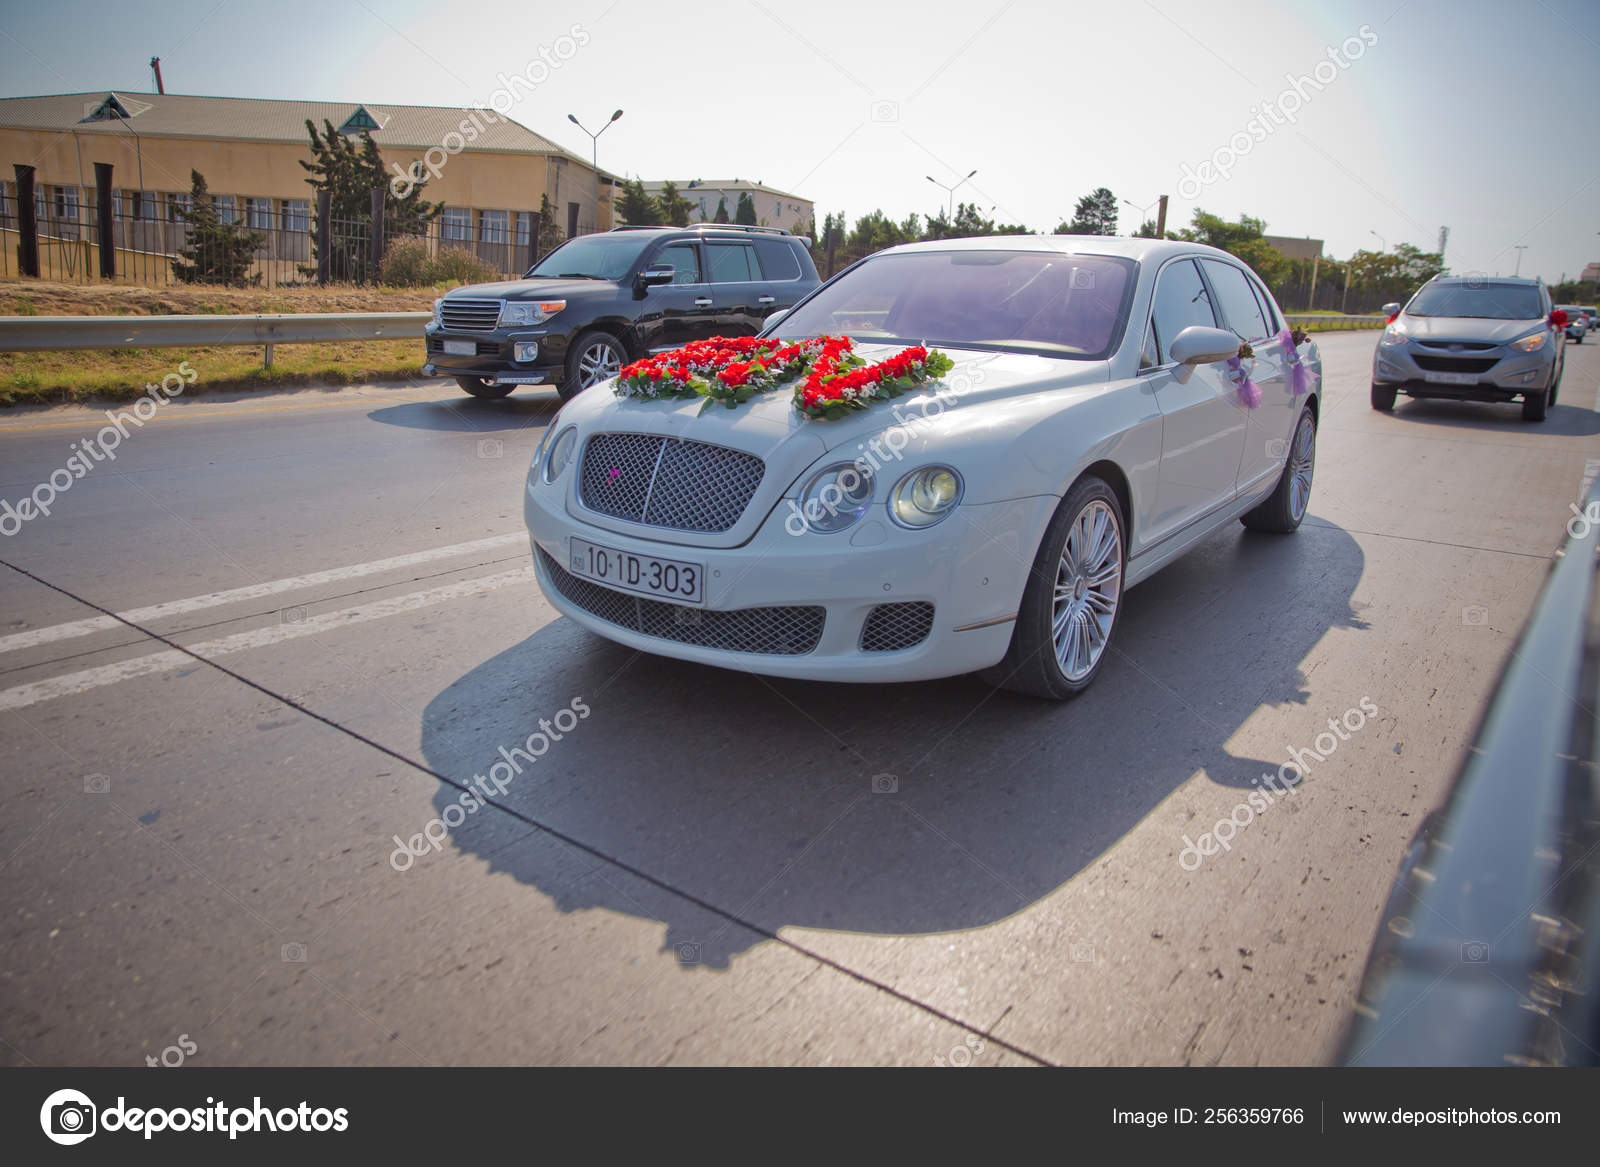 Closeup Image Of Wedding Car Decoration With Red And White